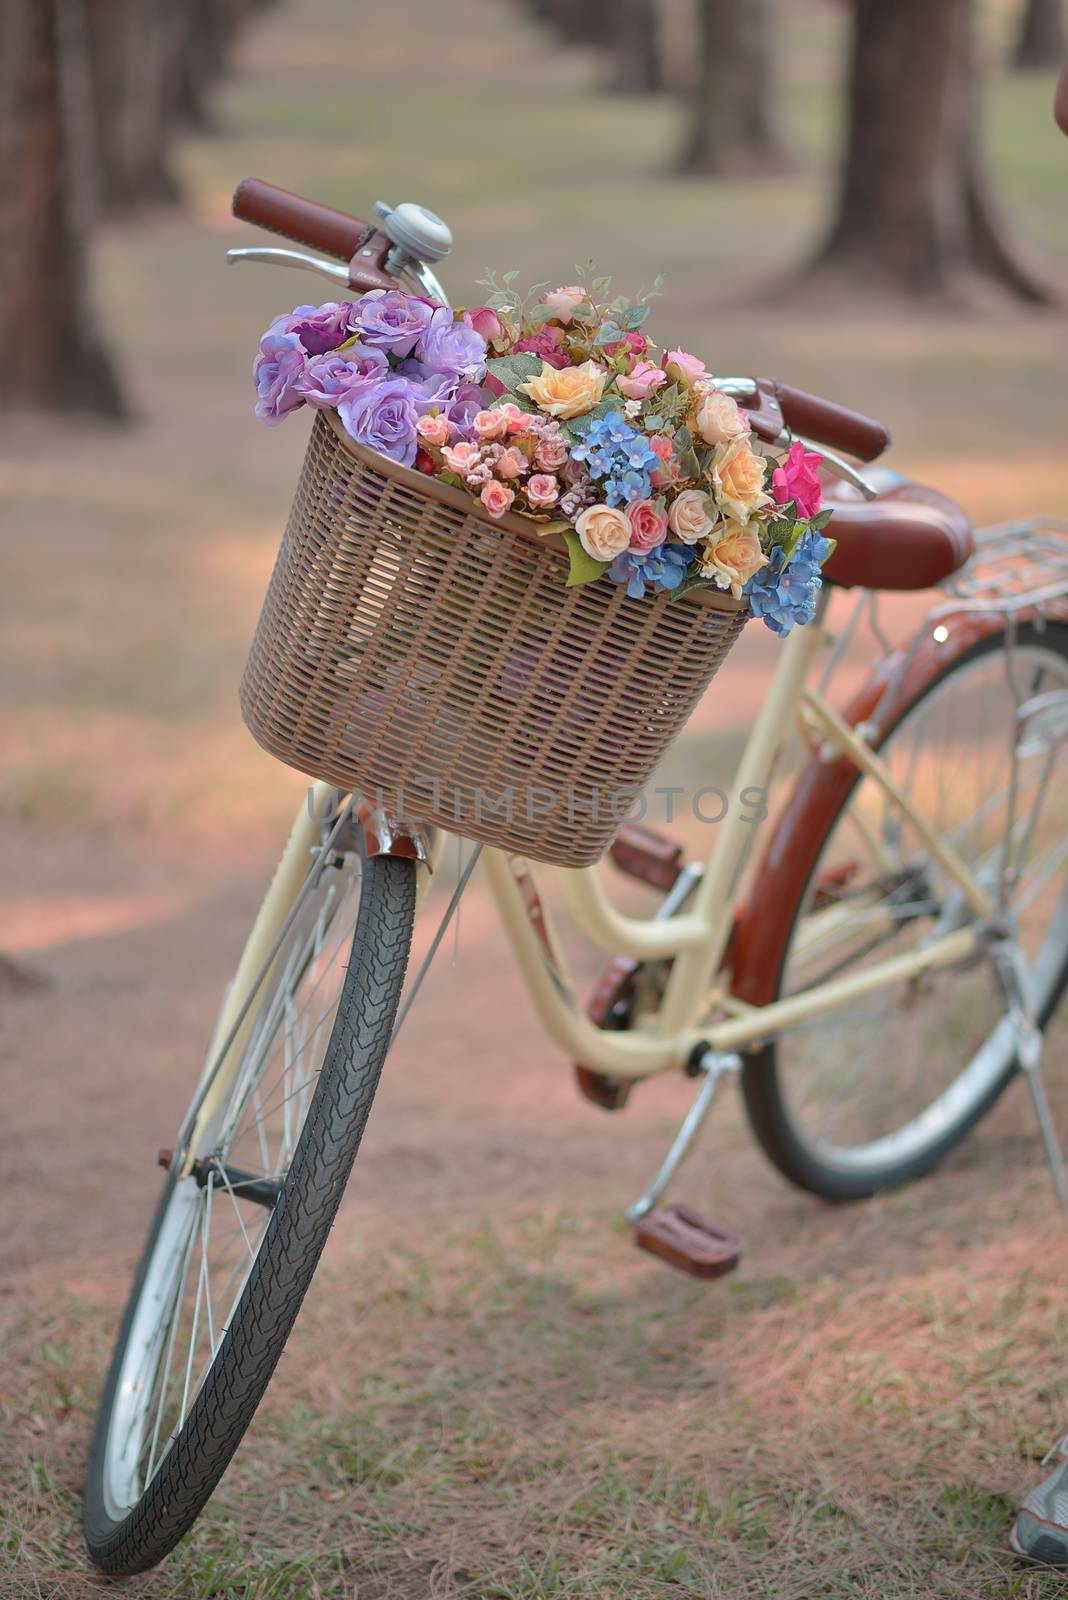 Soft focus flower on a bicycle